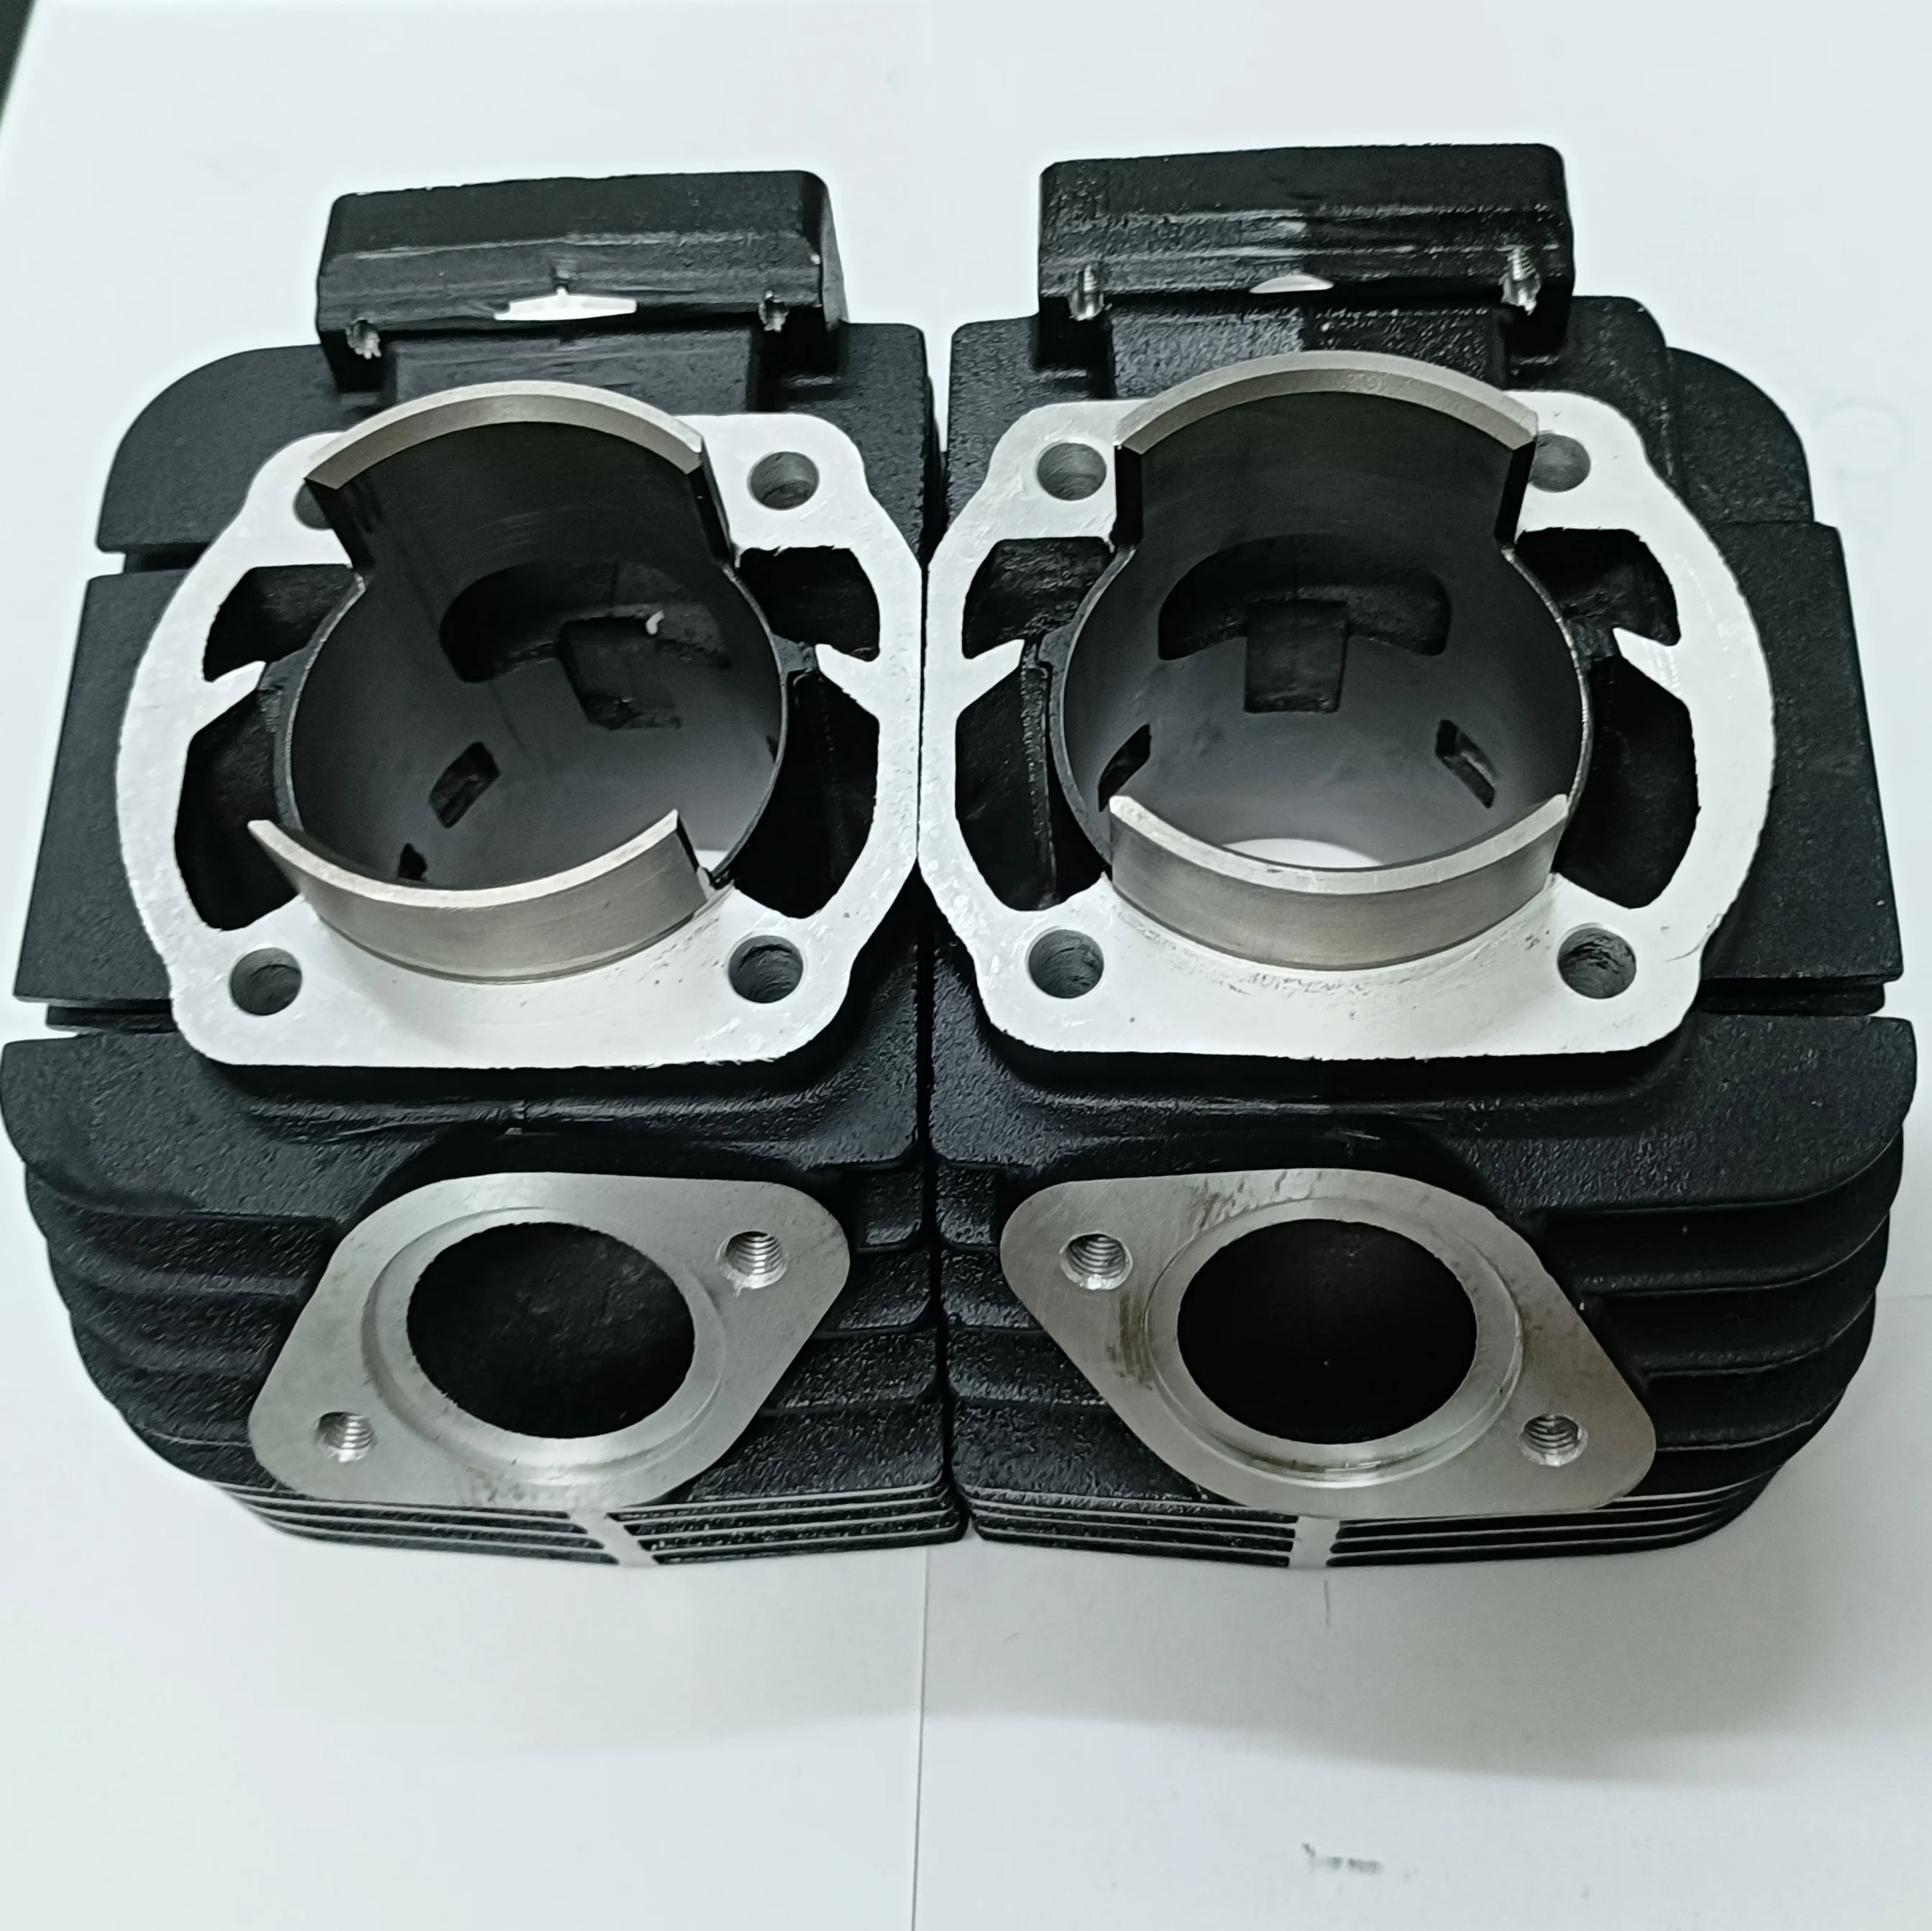 

Motorcycle engine cylinder accessories RD350 FOR 1973 1975 Year rd350 Cylinder Piston kit with